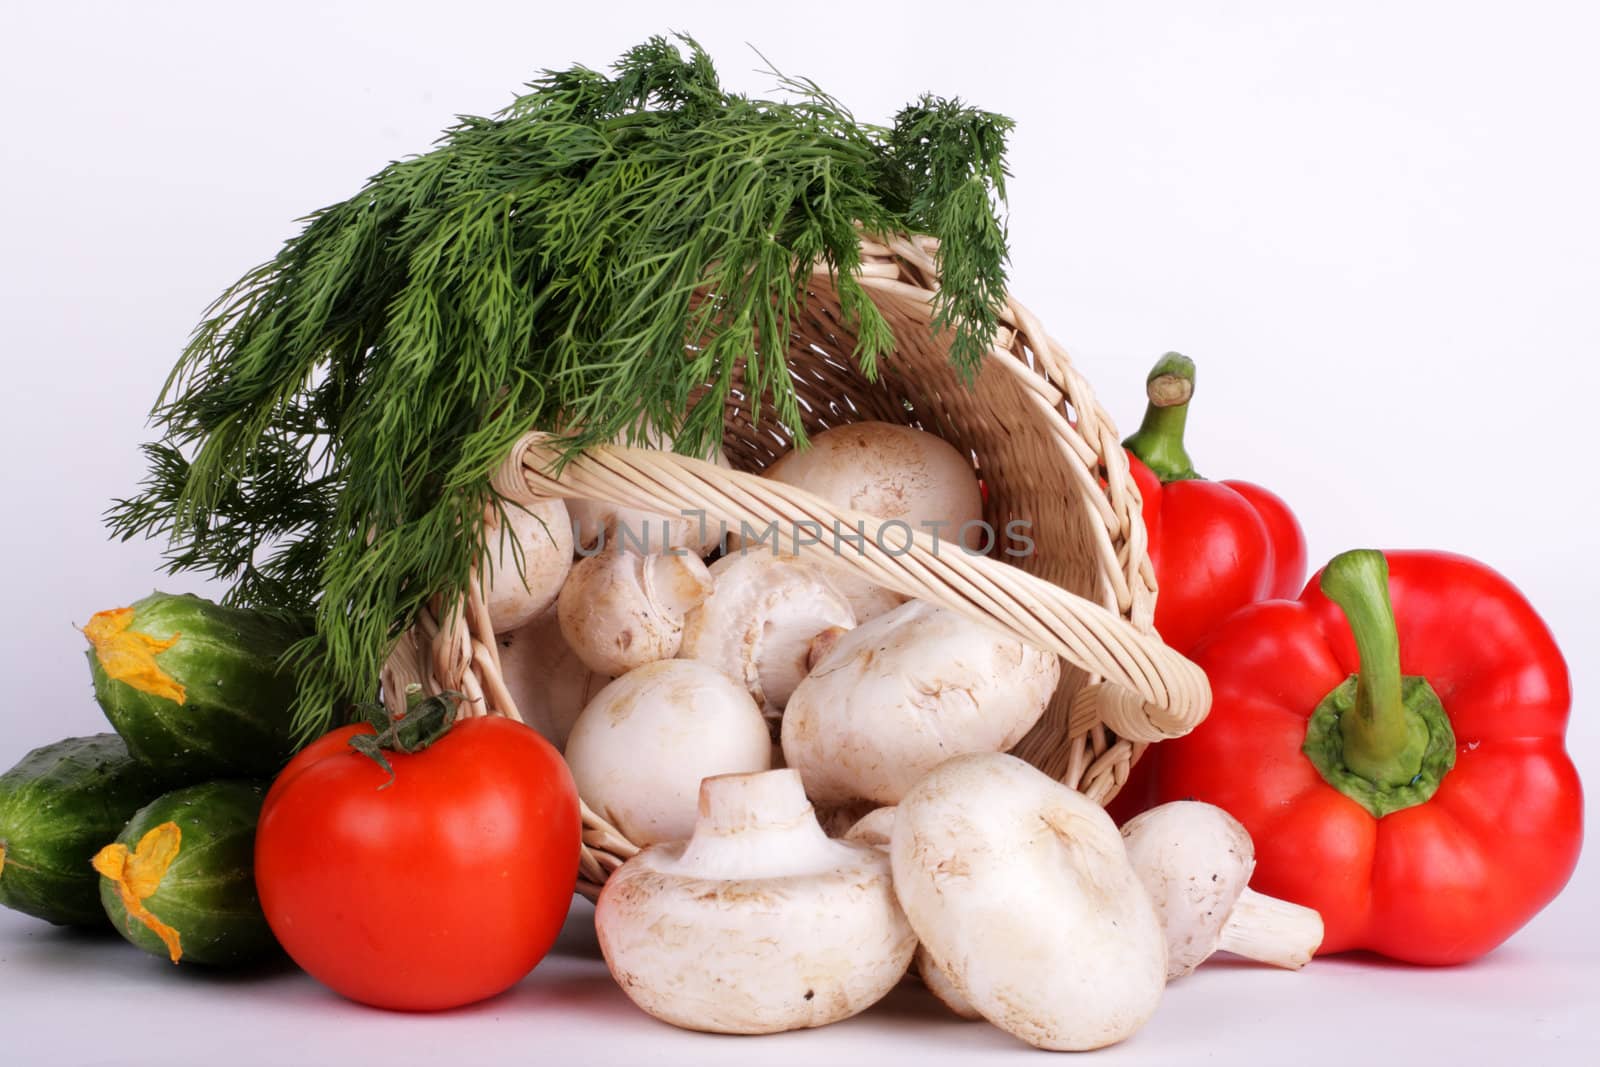 mushrooms, cucumbers, tomato and dill with basket on white